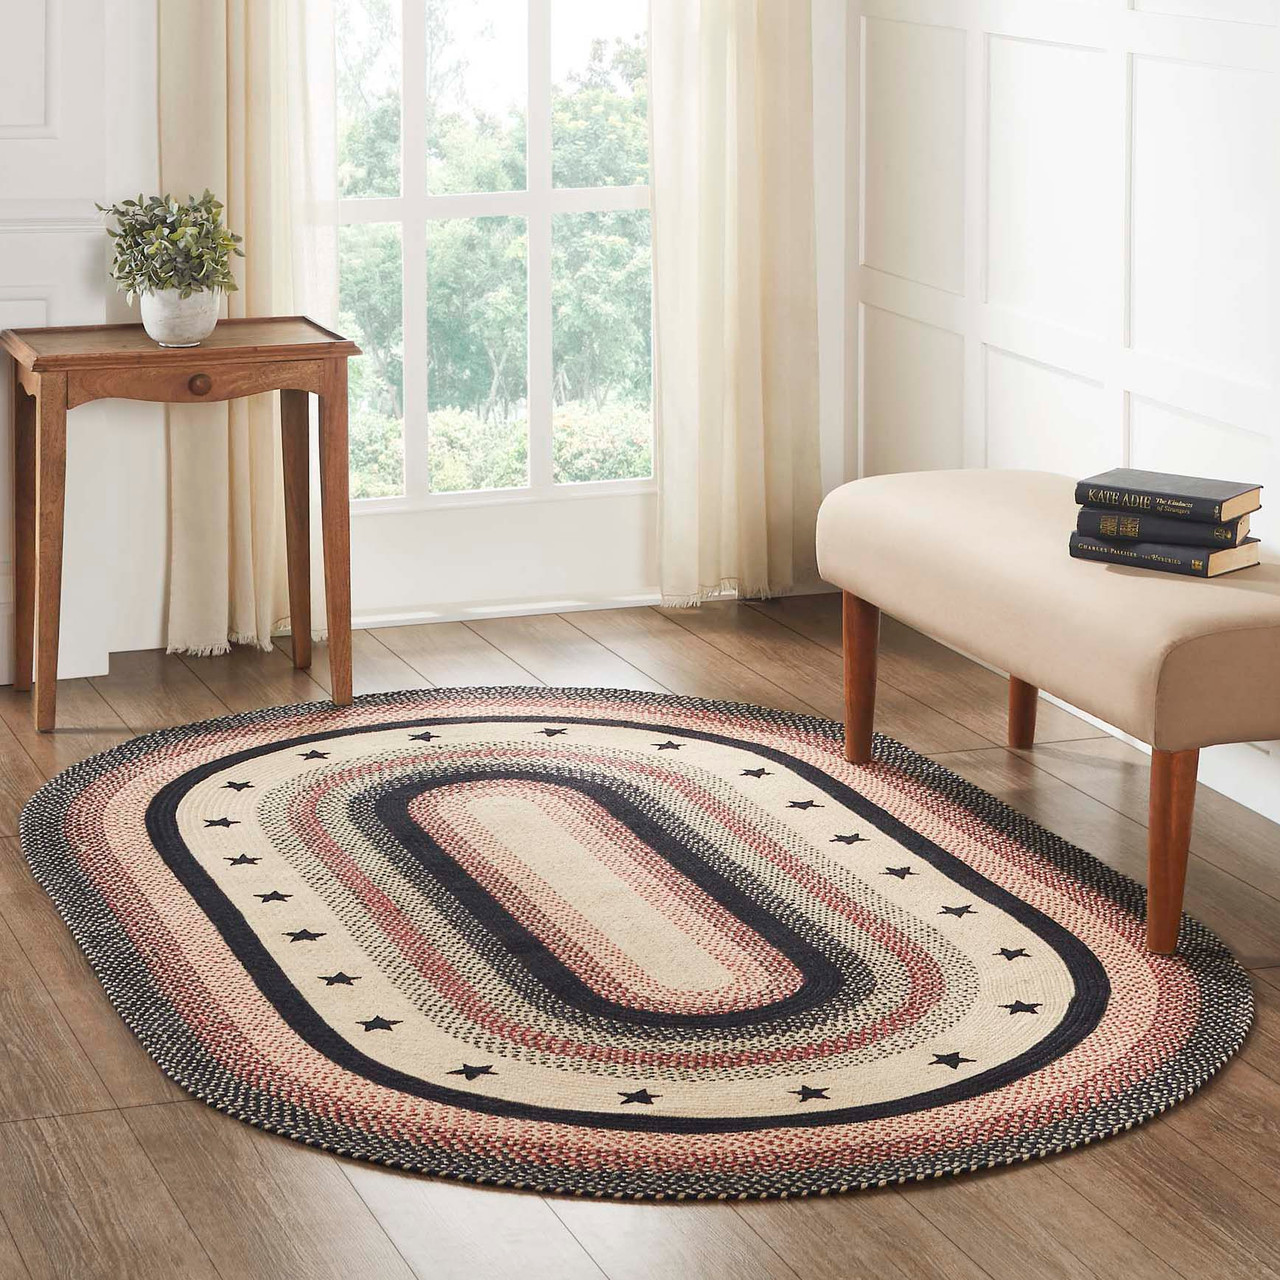 VHC Brands - Colonial Star Braided Area Rug - Natural & Black - 60